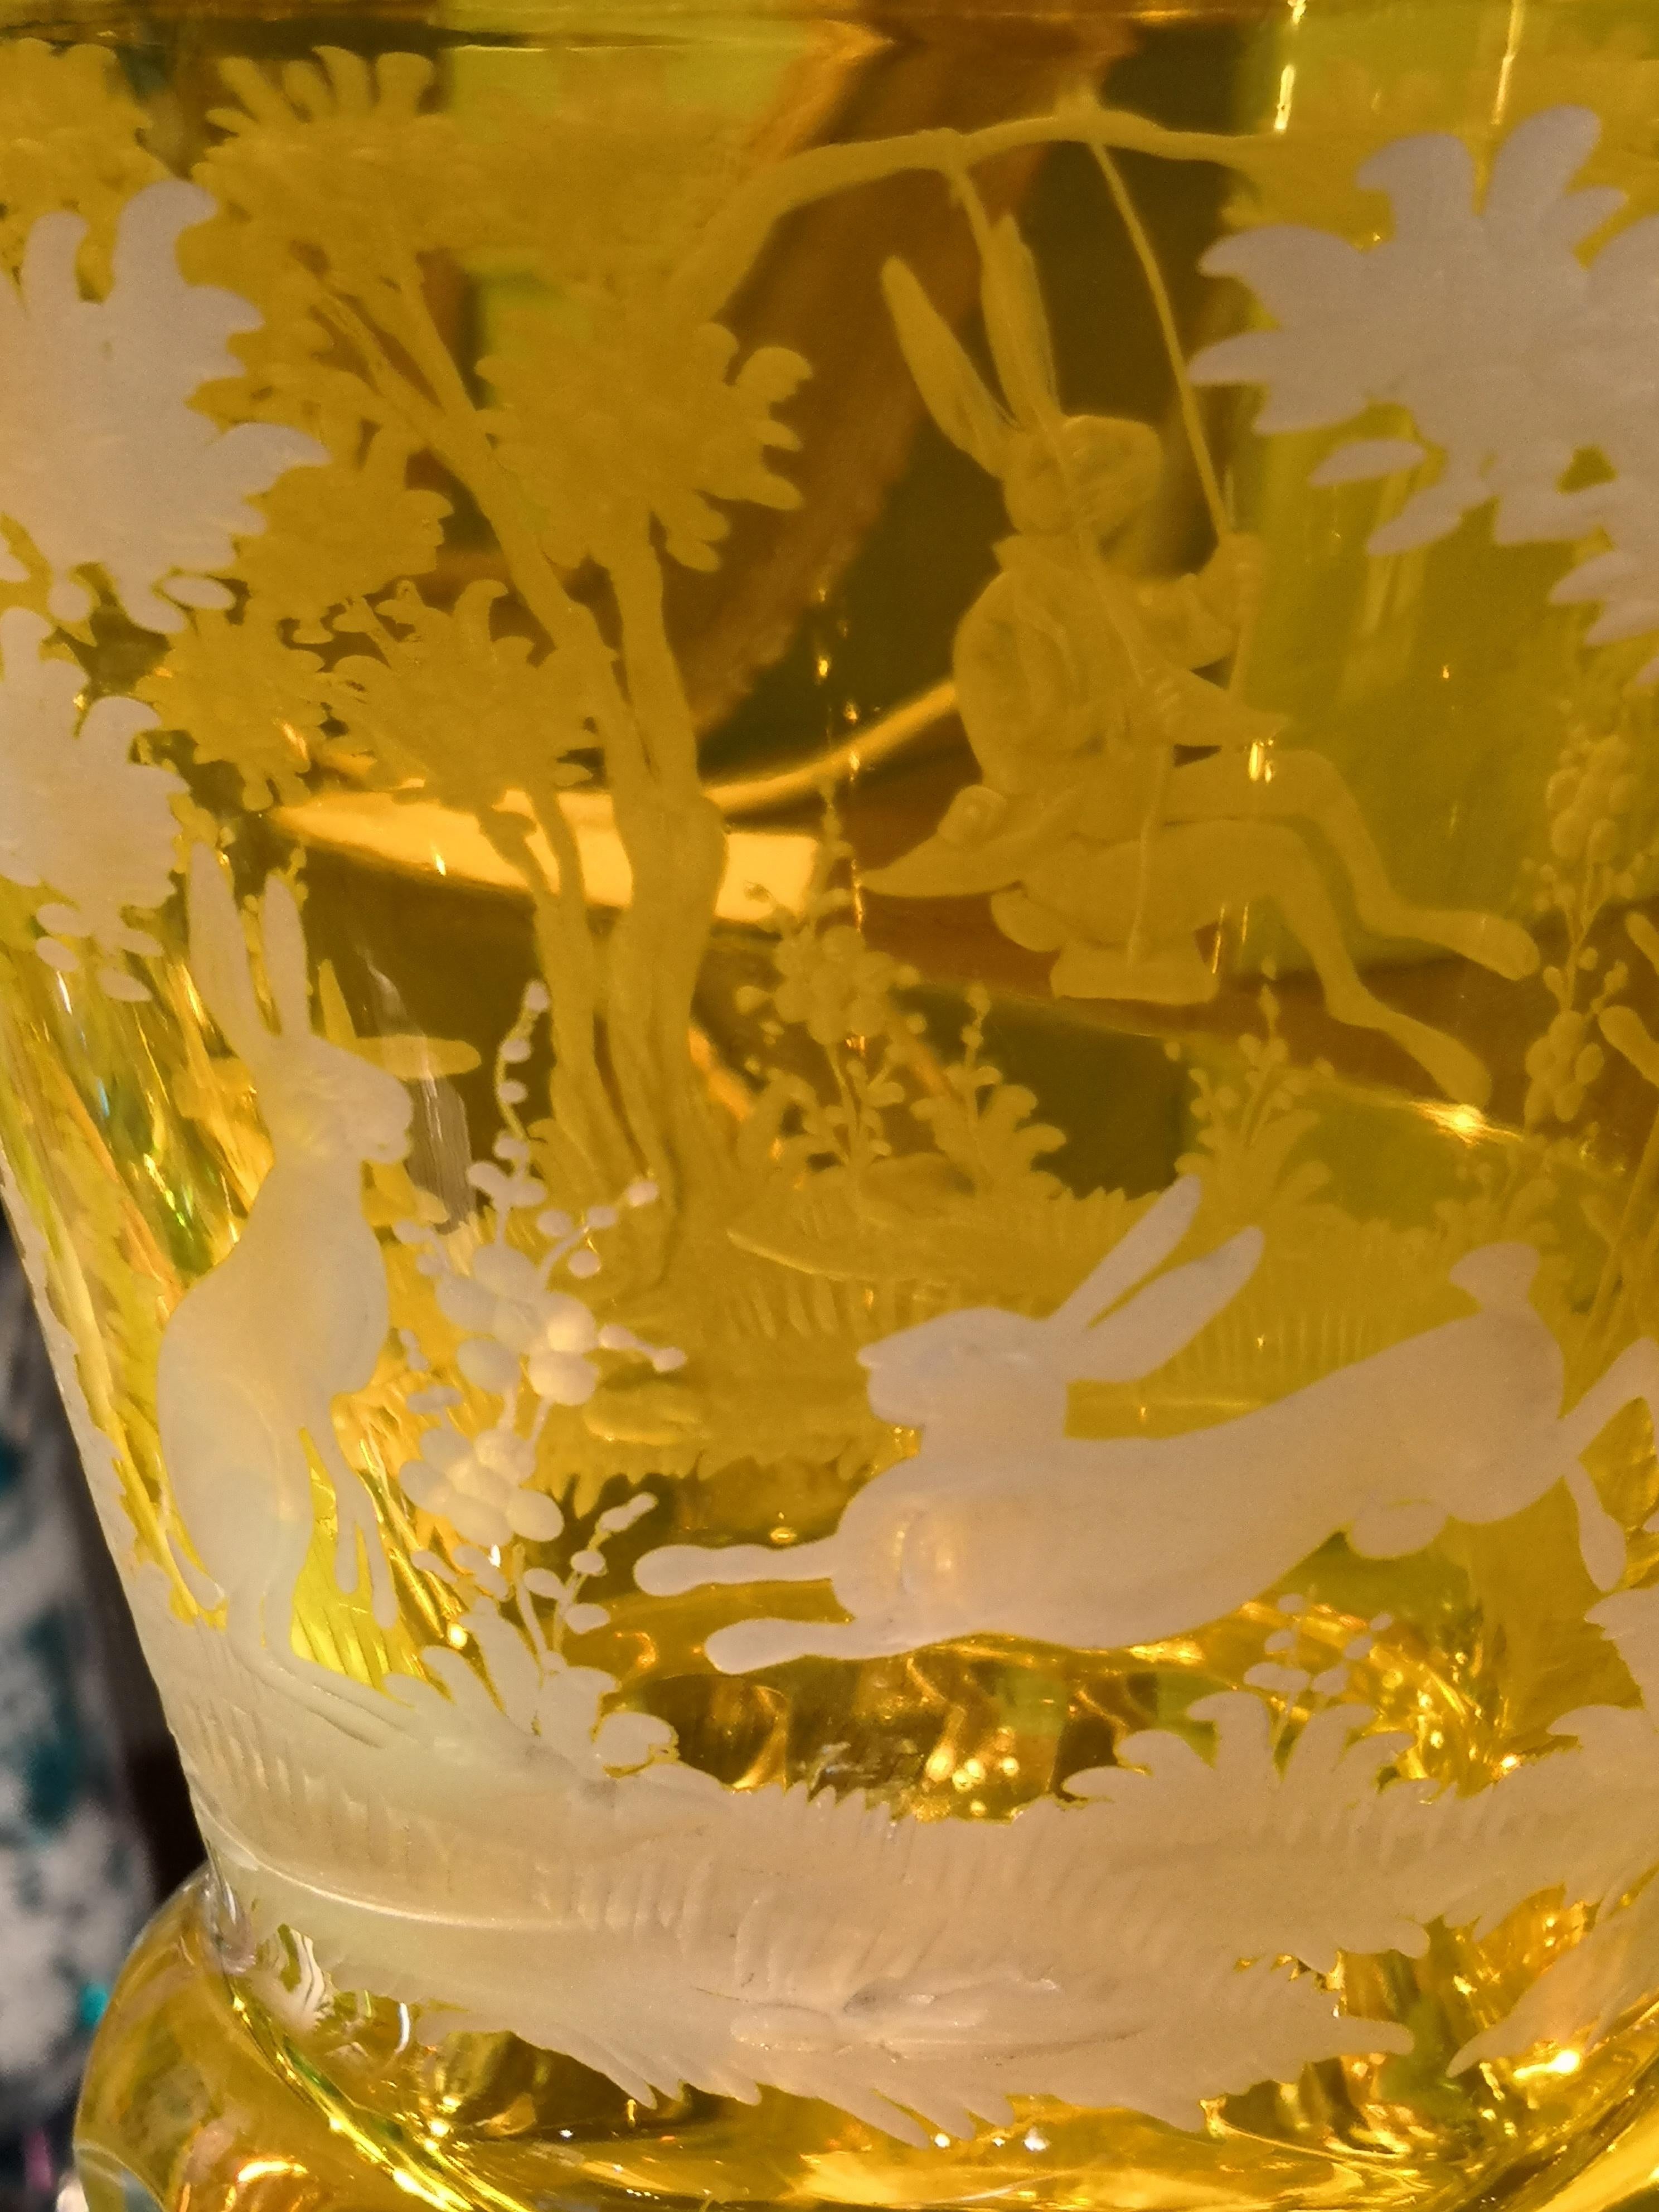 Hand blown crystal vase in yellow glass with a antique country style Easter design. Hand carved by Bavarian glass artists . A rich garland of trees and flowers with rabbits all around. One rabbit sitting on a see-saw and two smaller rabbits decorate